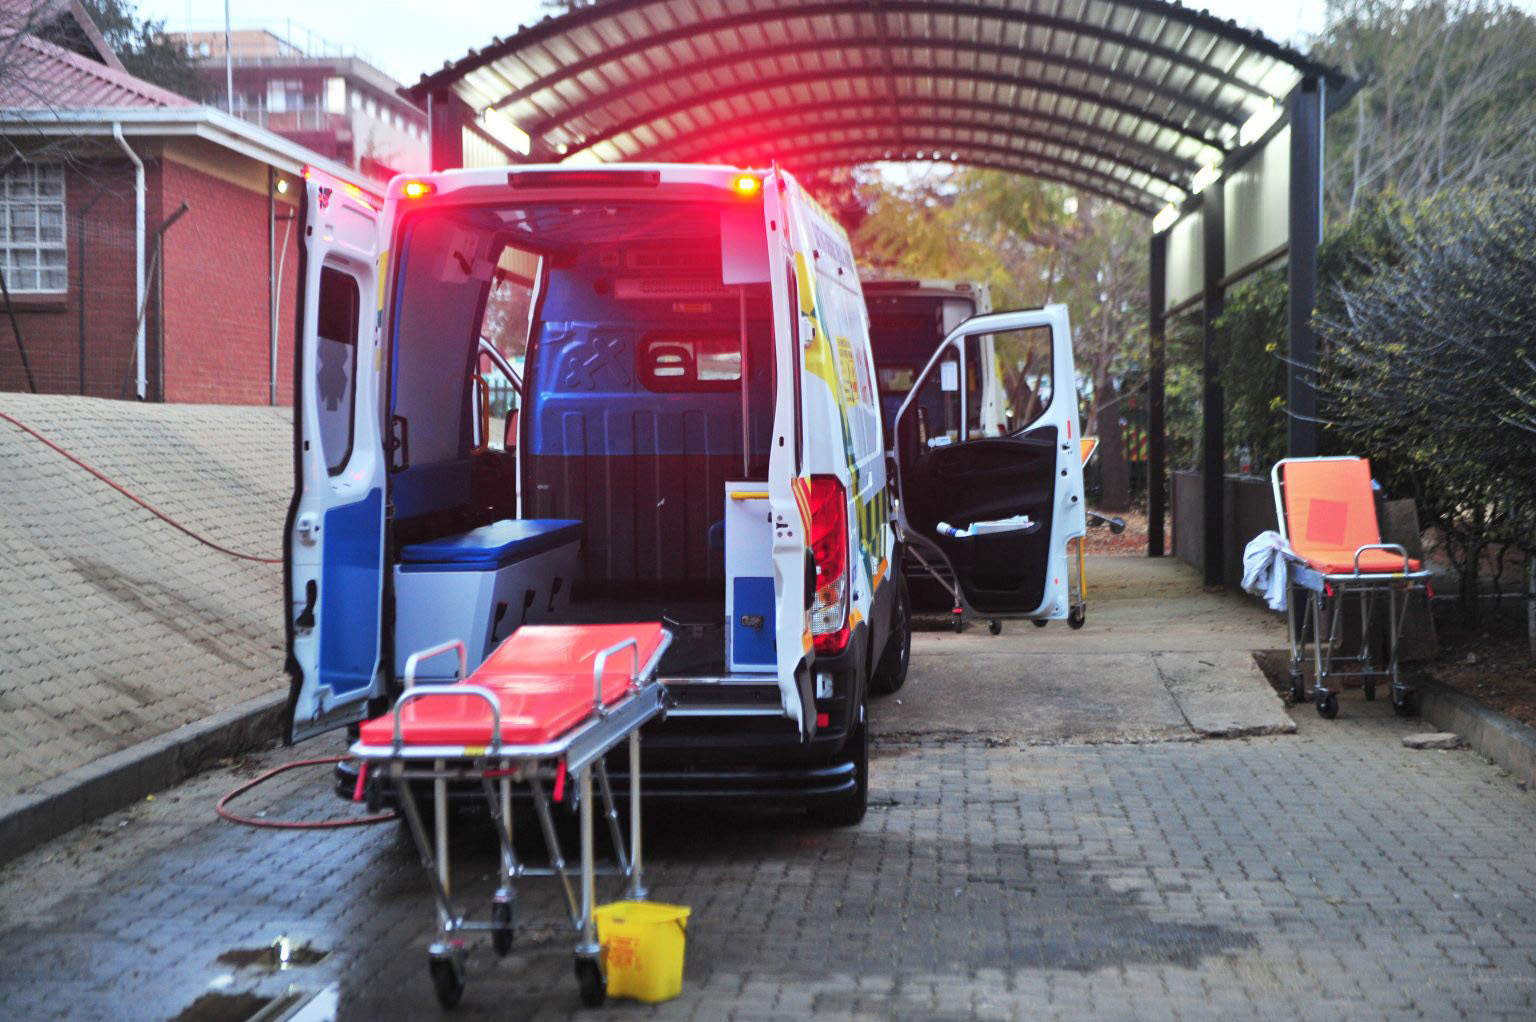 An empty ambulance with its back doors open parked outside a hospital